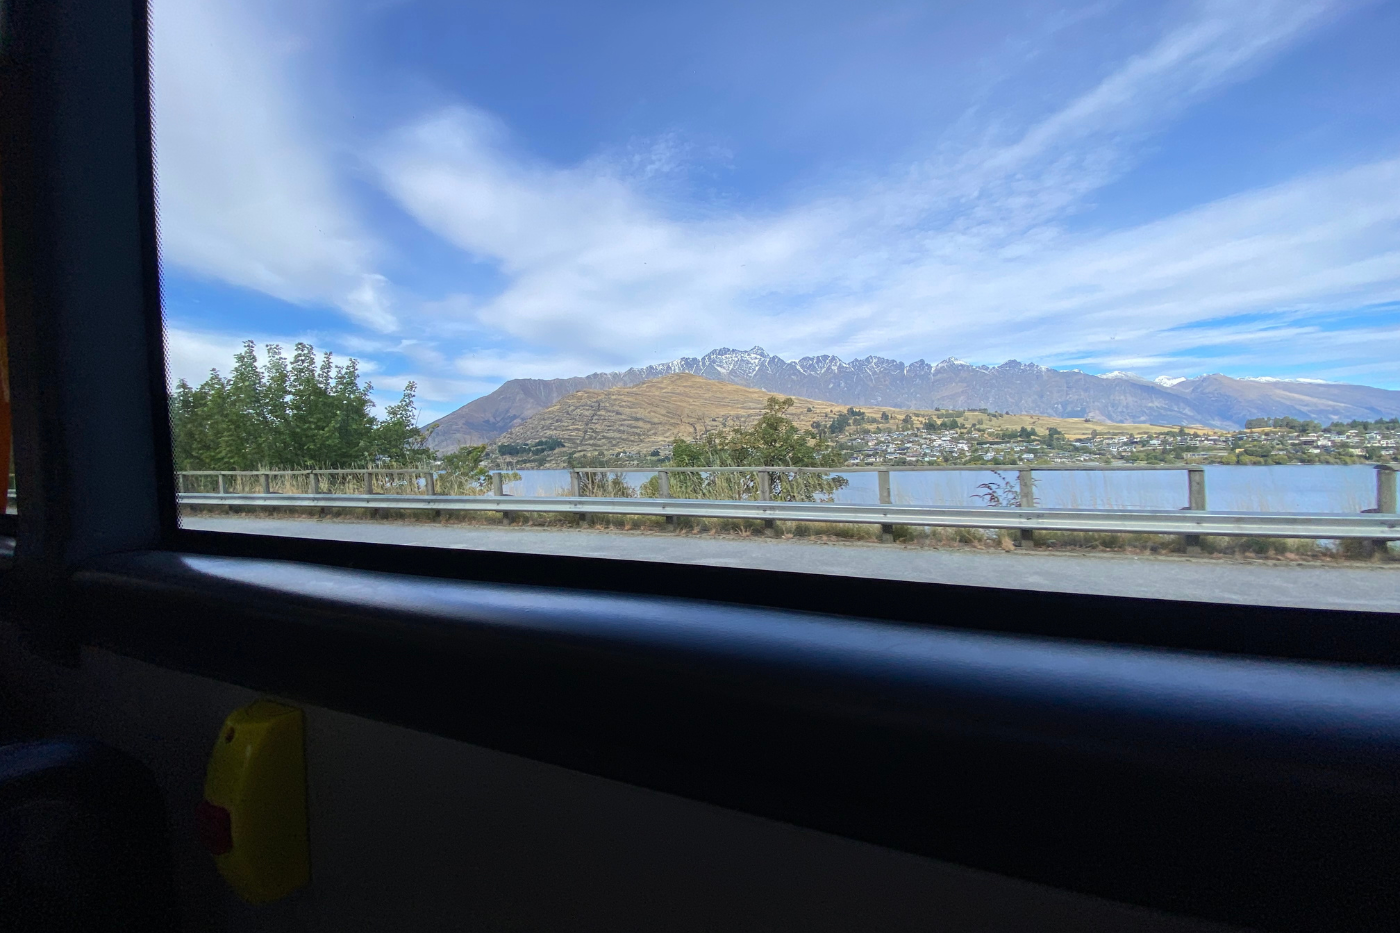 View of the Remarkables mountain range from a public bus window